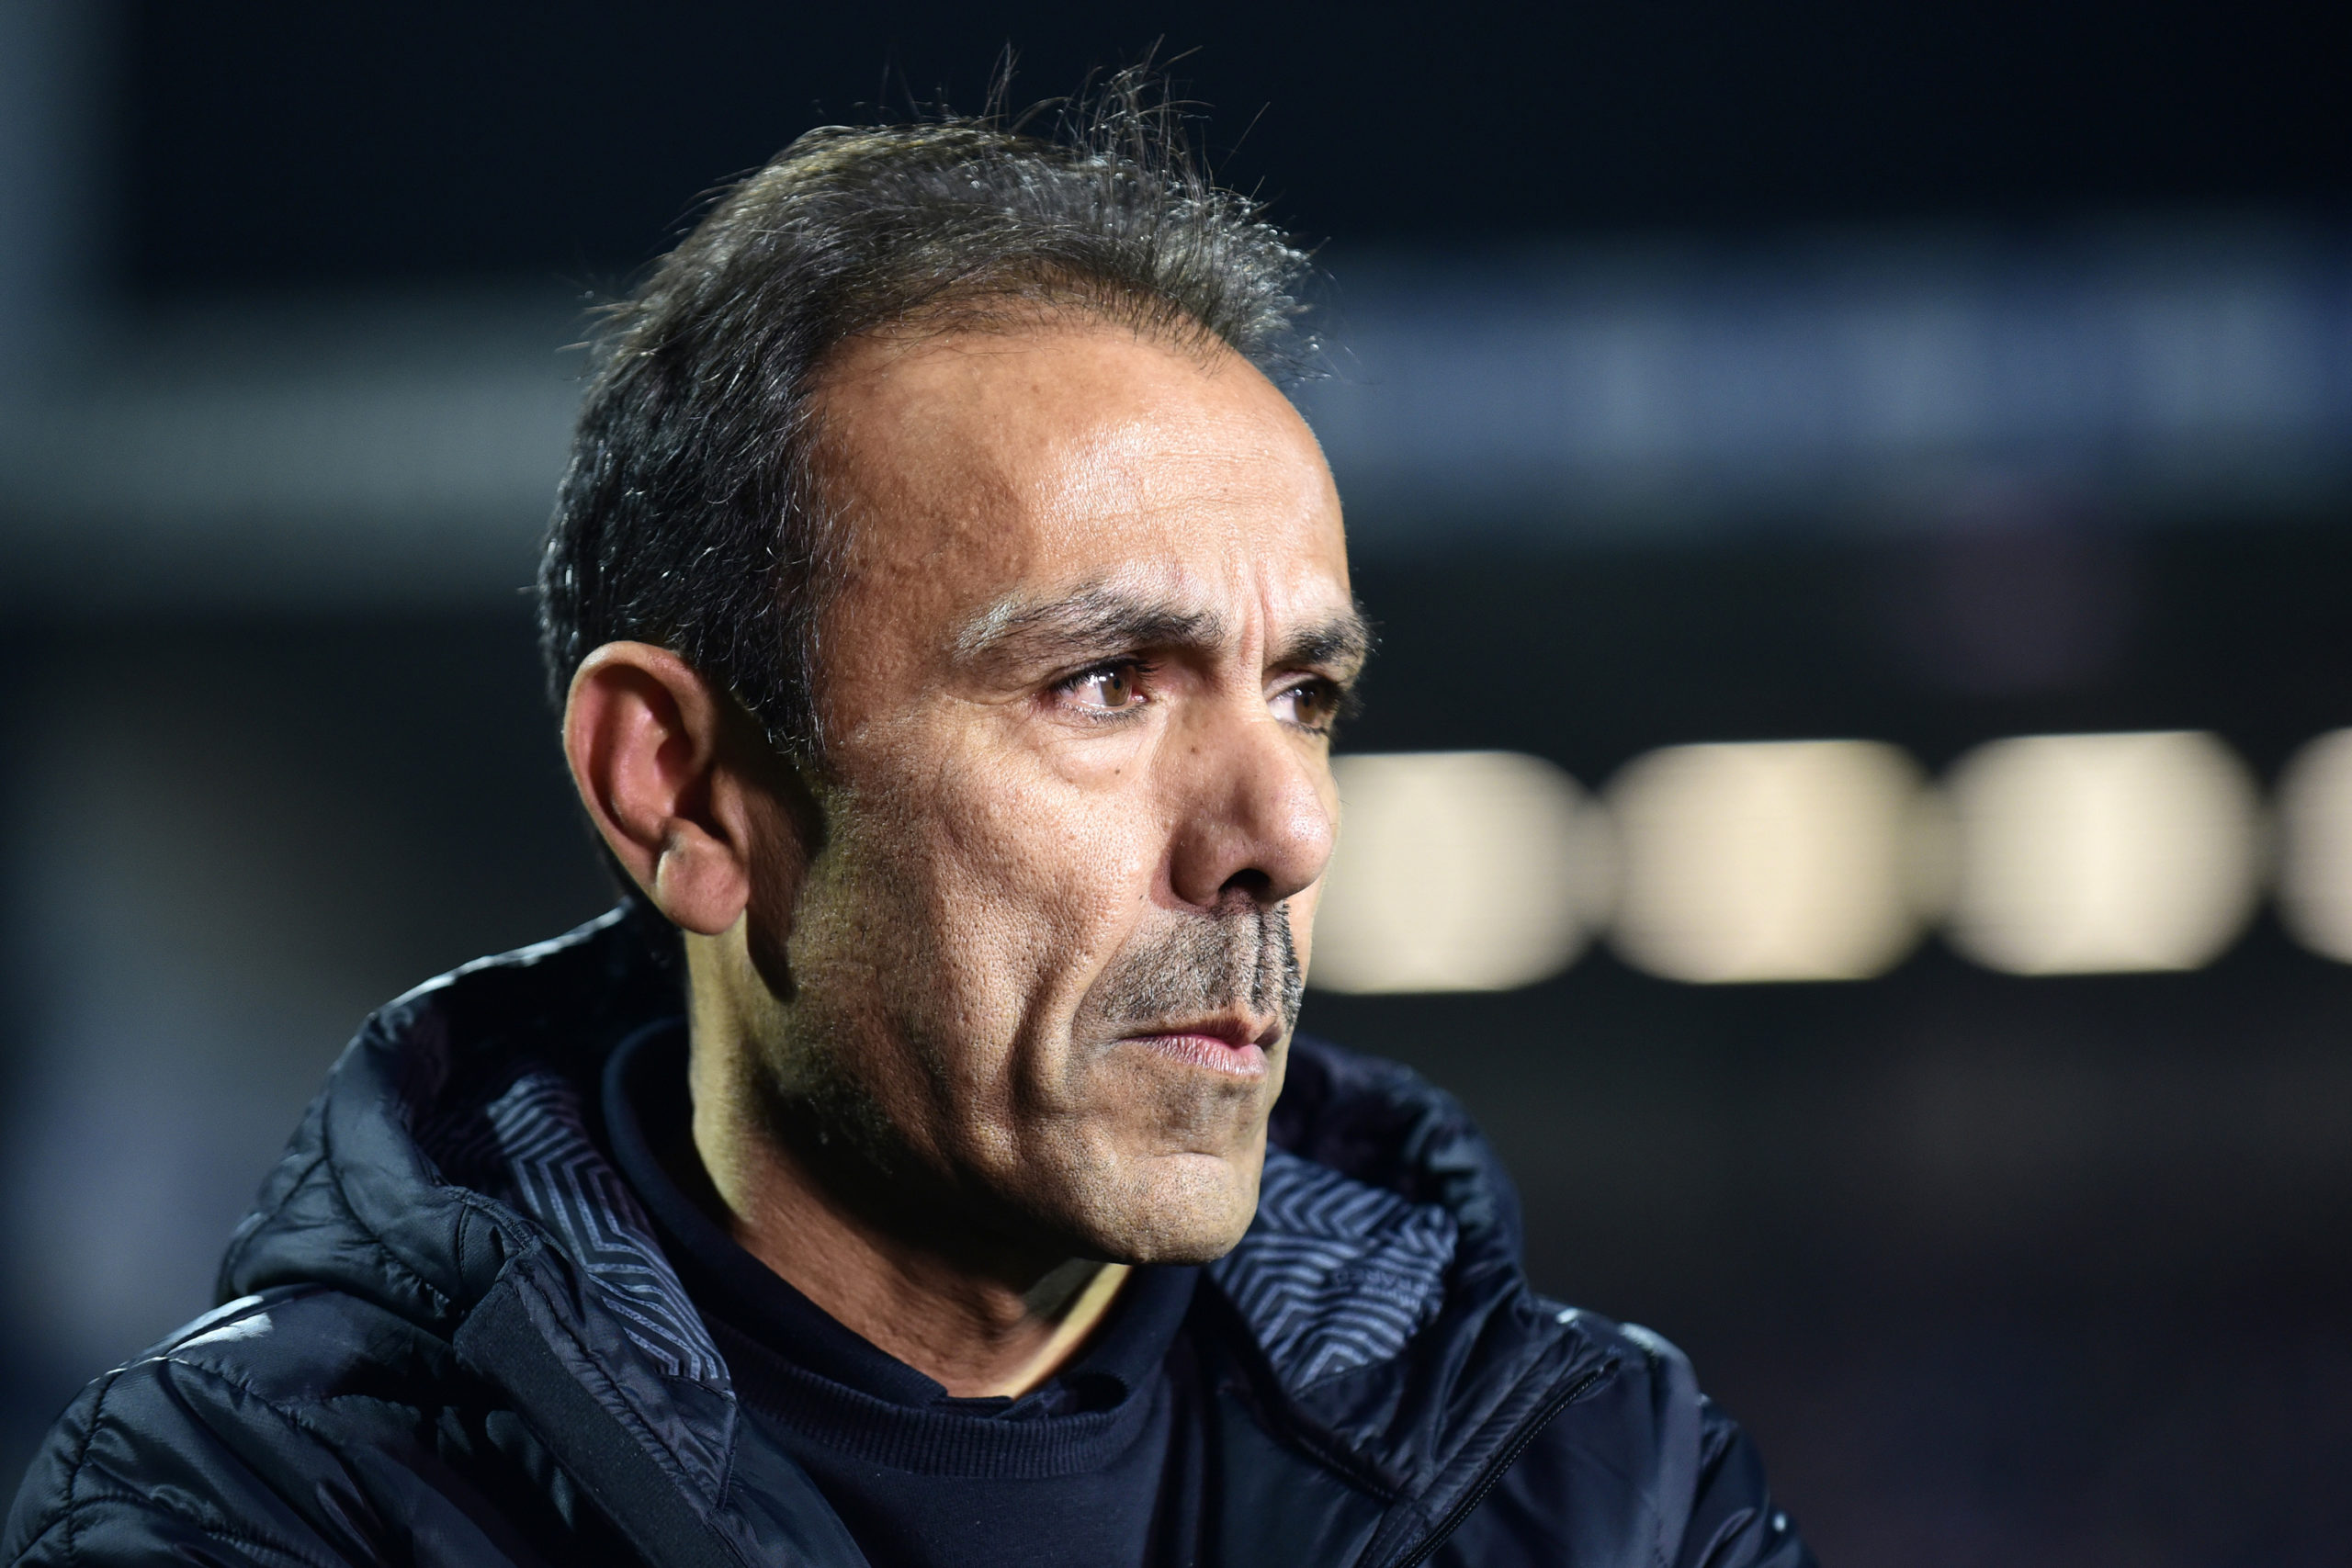 “This comfort-zone, which occurred, did irritate and frustrate me” An interview with Jos Luhukay